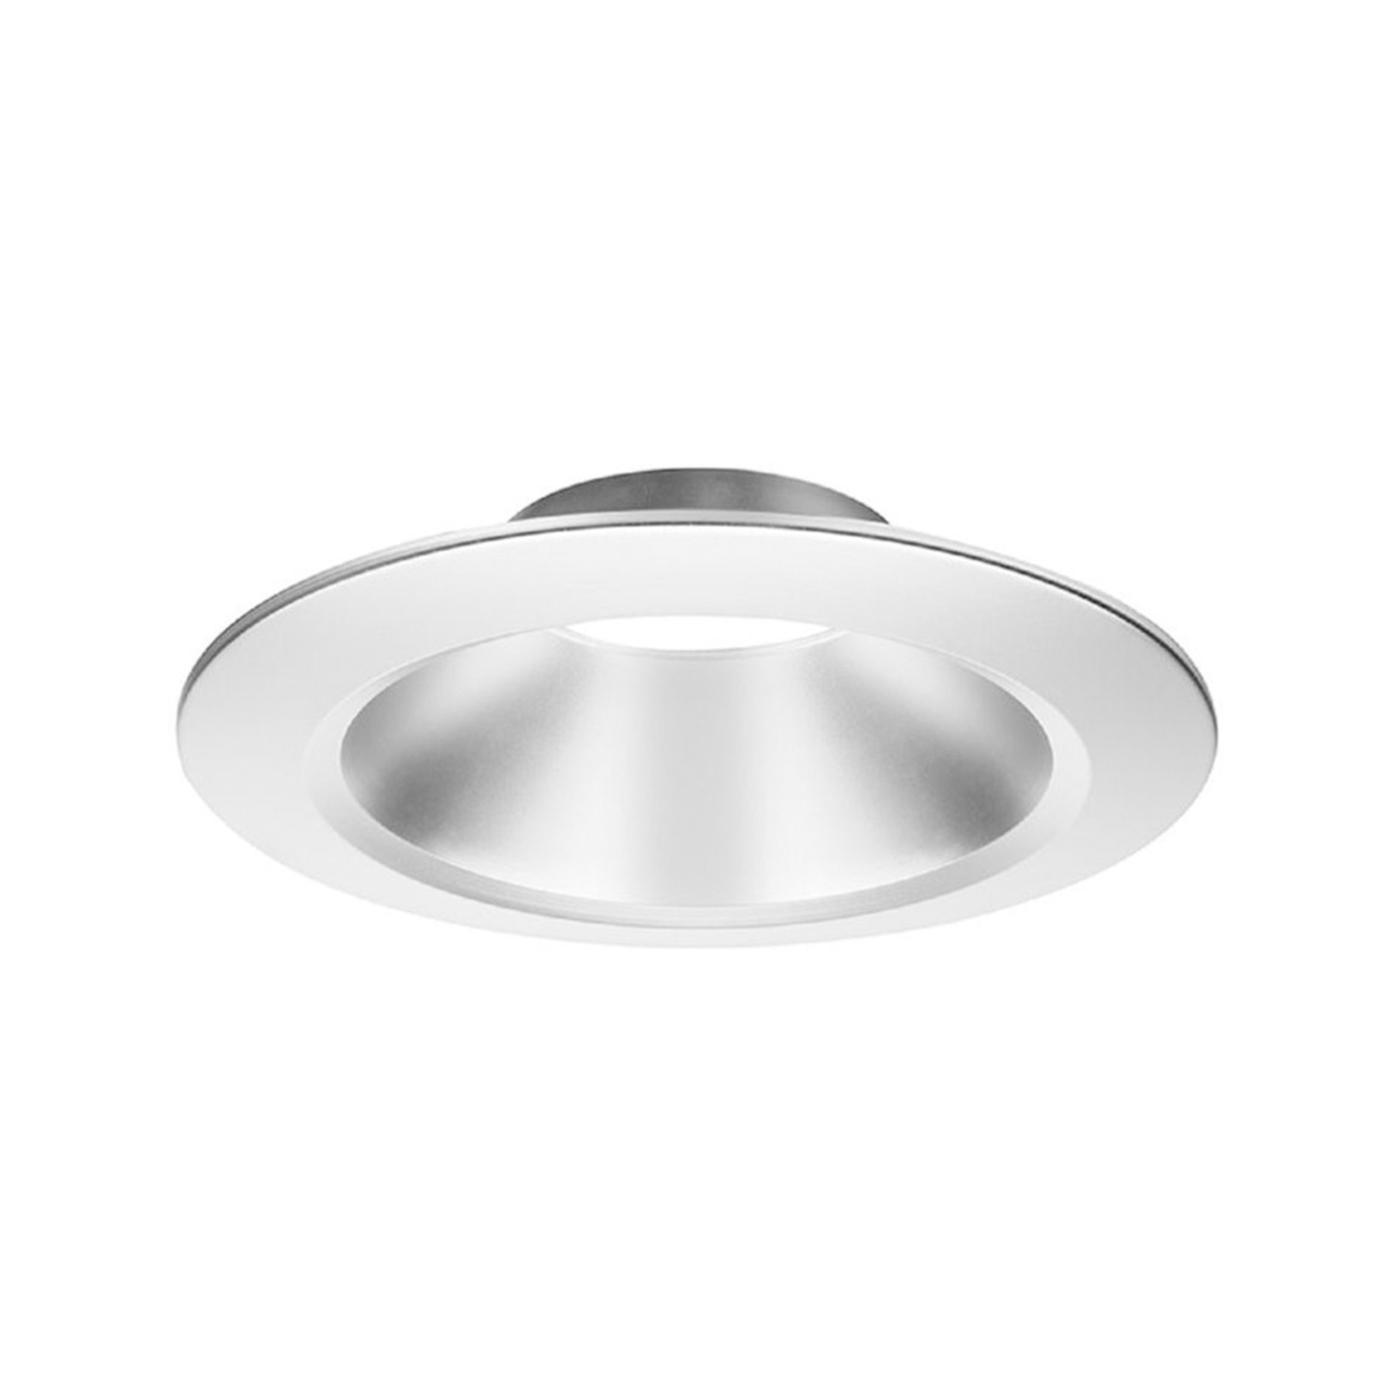 4" Round Clear Downlight Reflector & Trim Matte Diffuse For Fixtures with Emergency Battery